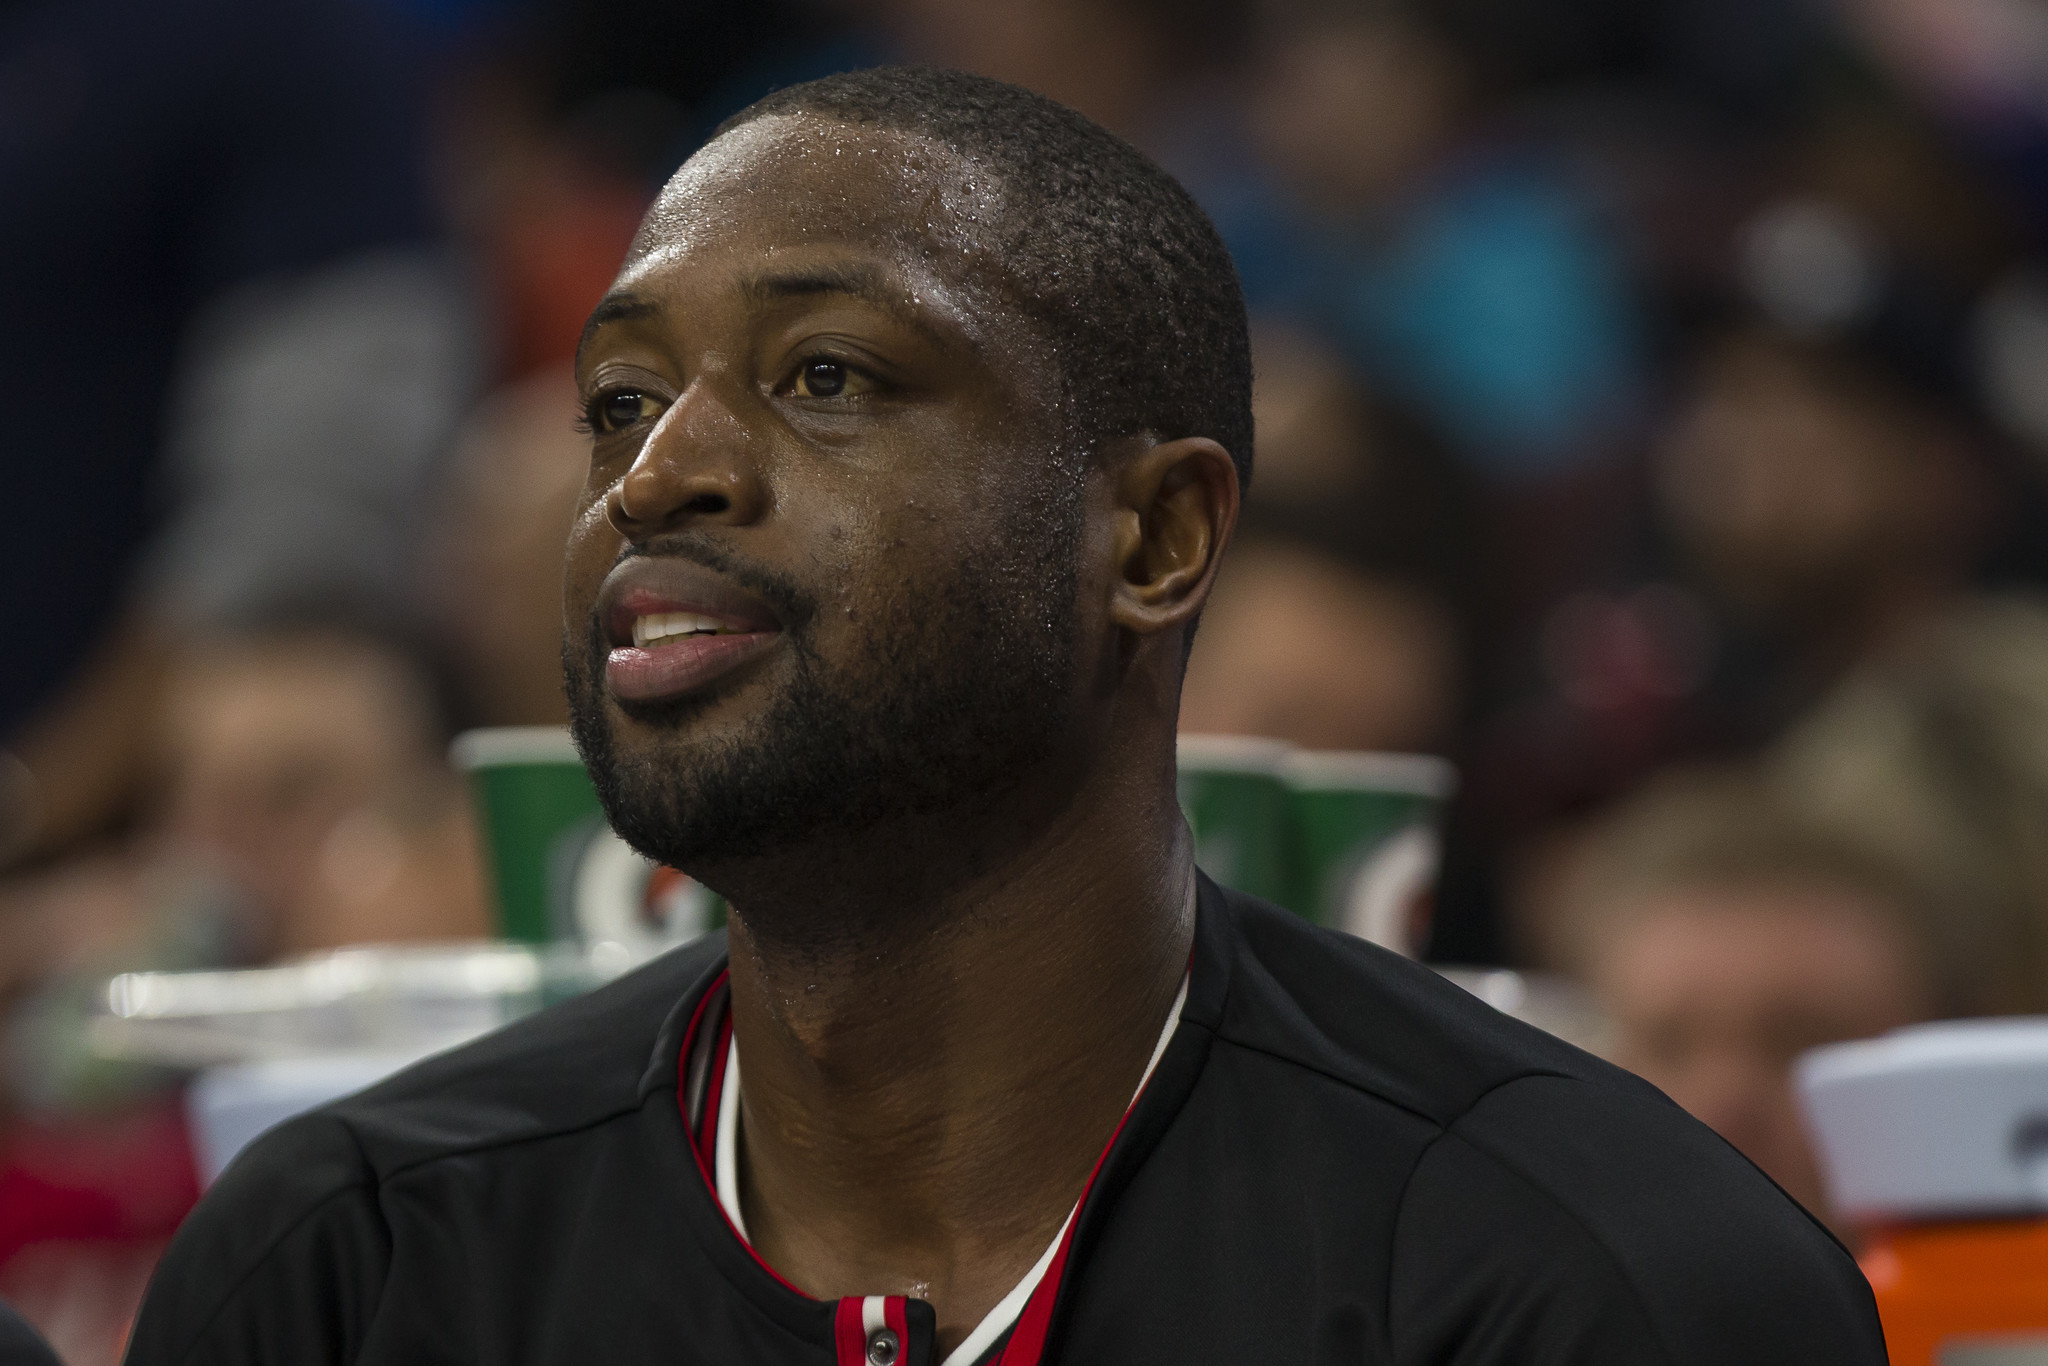 Chicago's most pleasant sports surprise thriving in Dwyane Wade's world